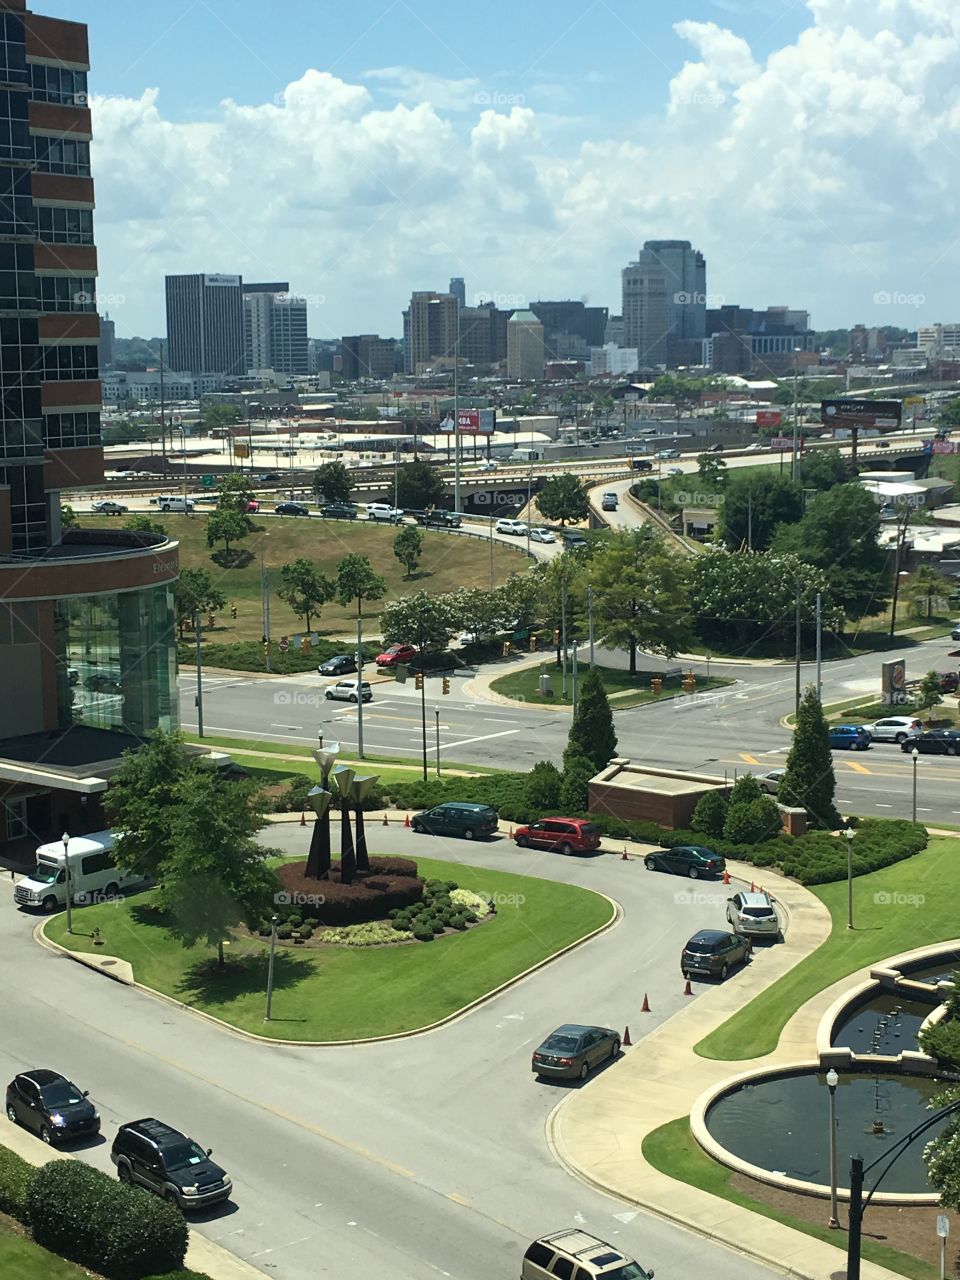 View from my doctors office looking down onto Southside Birmingham, Alabama. 